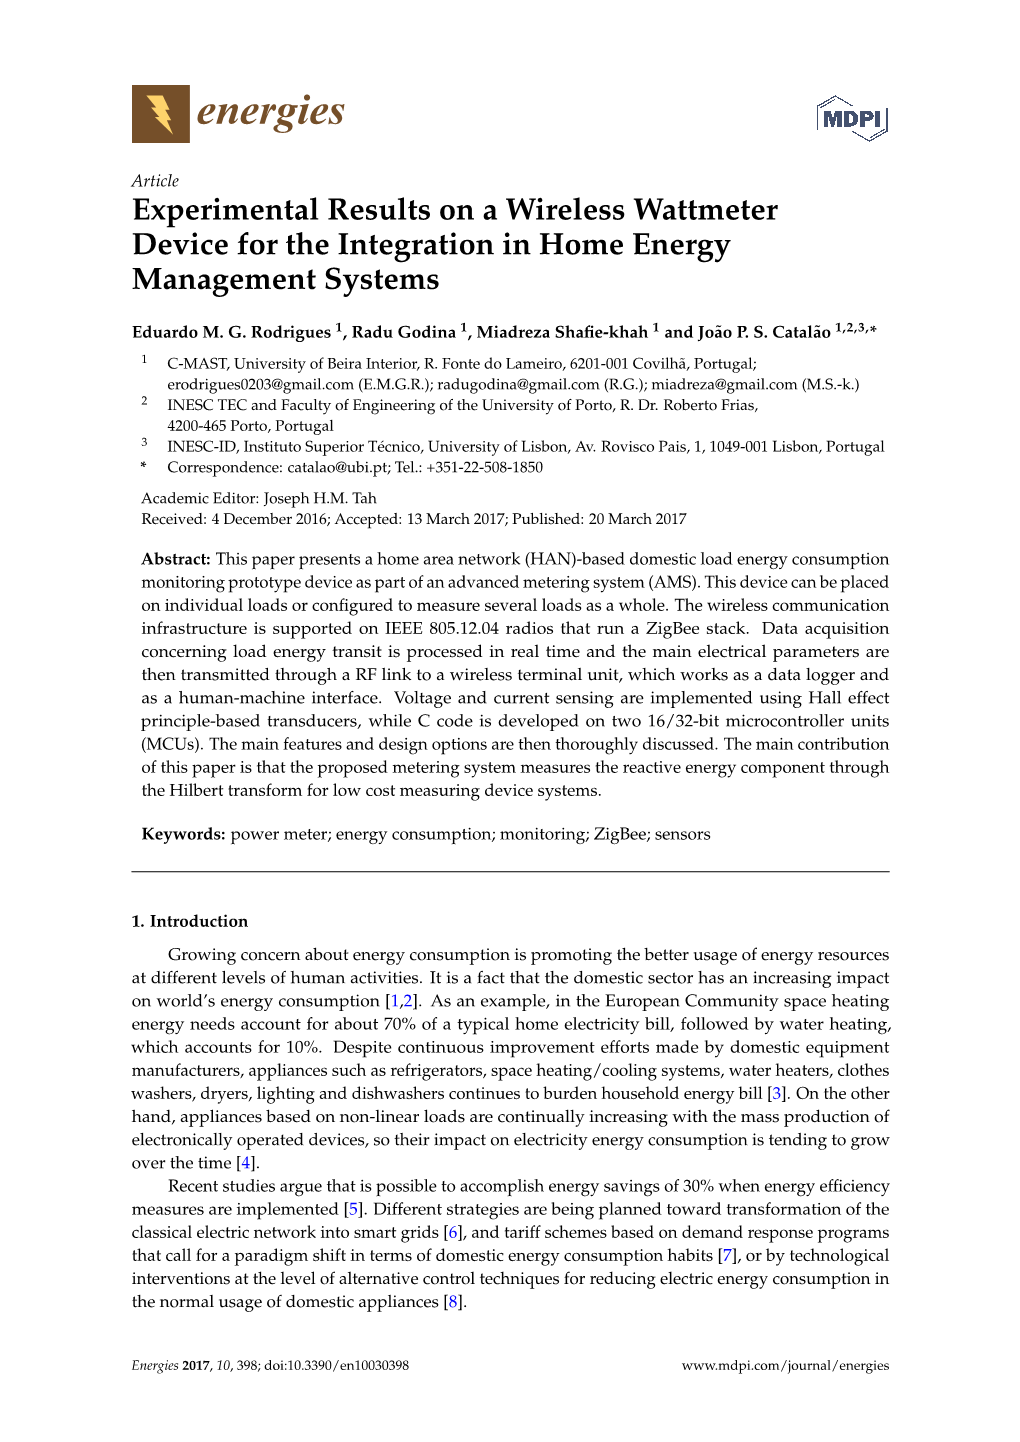 Experimental Results on a Wireless Wattmeter Device for the Integration in Home Energy Management Systems